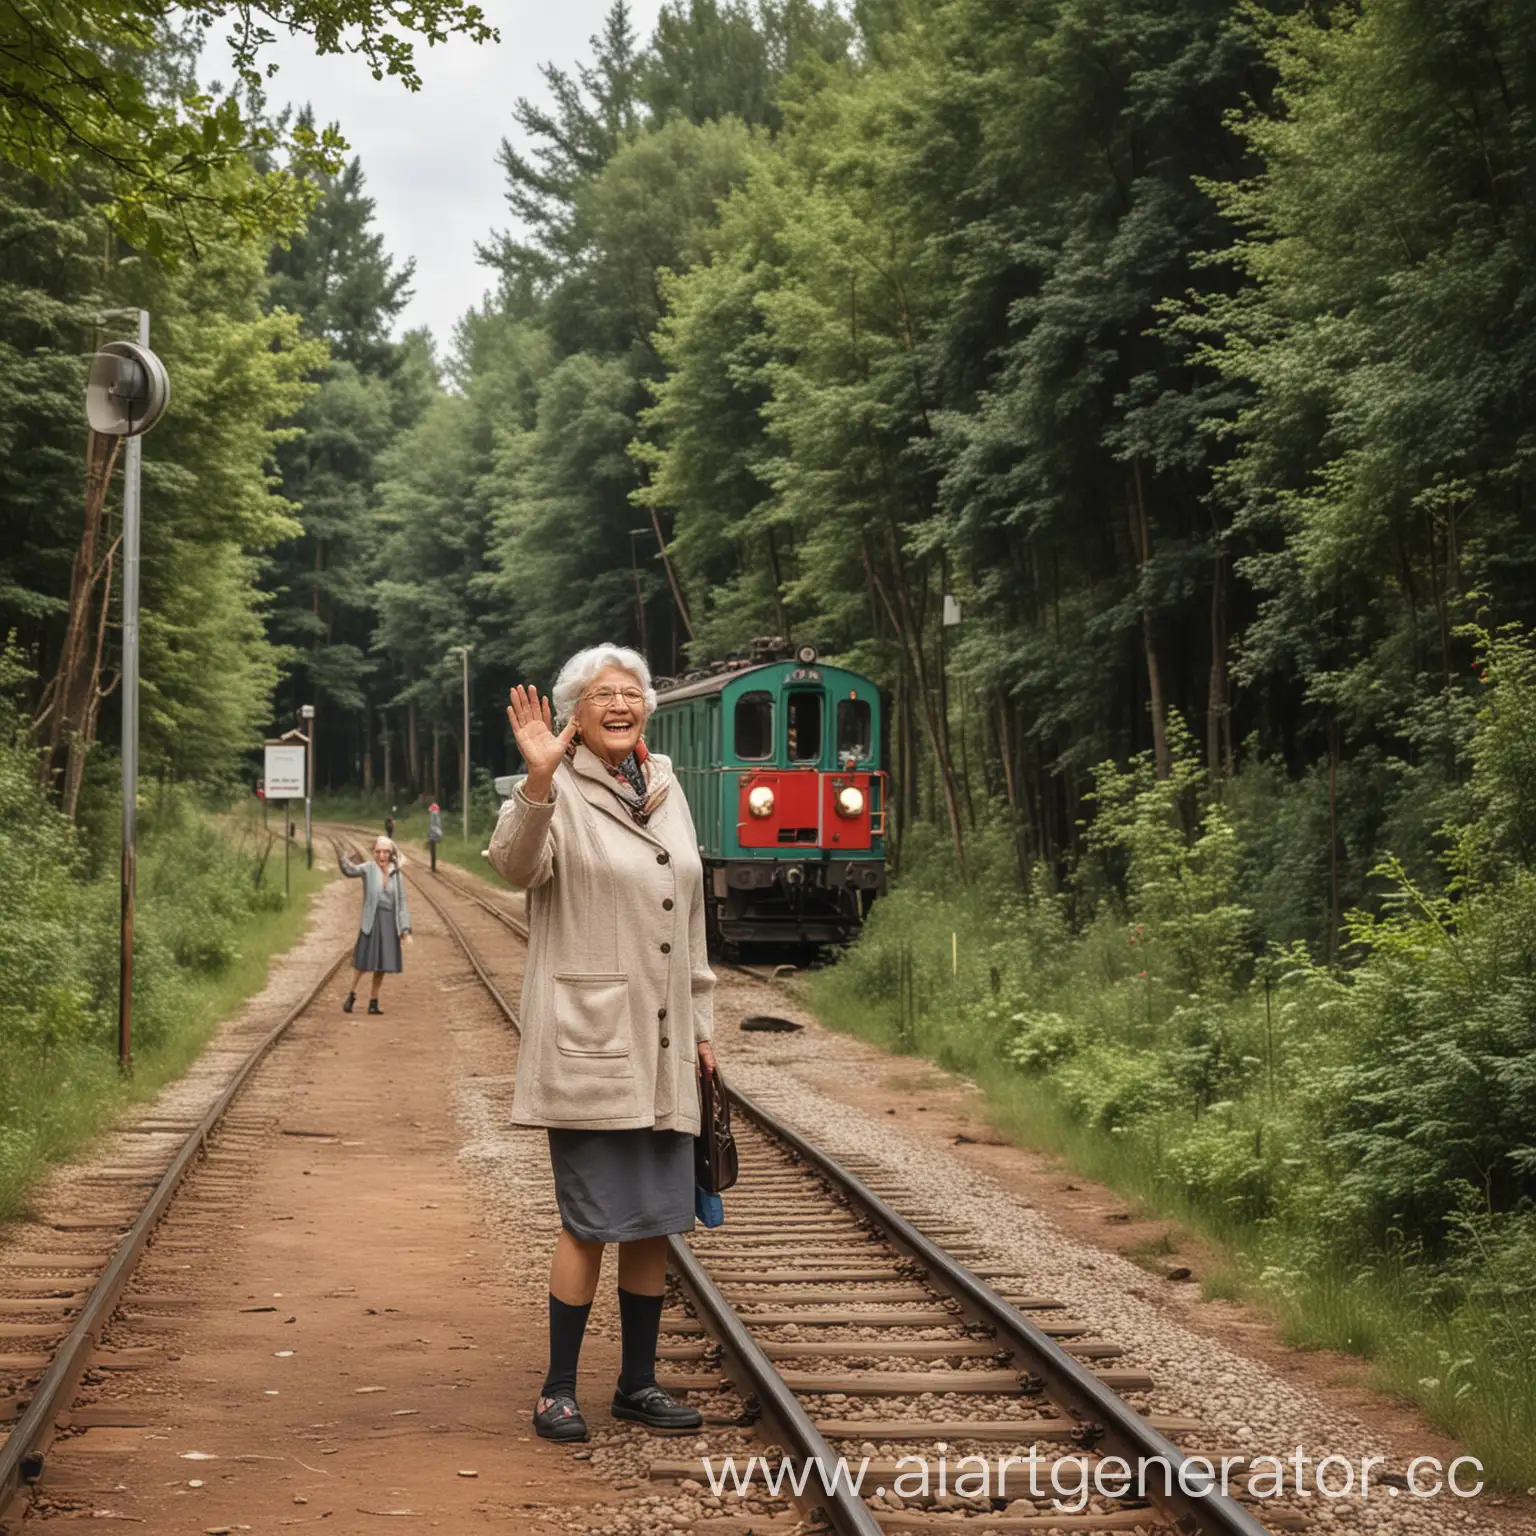 Smiling-Grandmother-at-Forest-Railway-Station-with-Nearby-Train